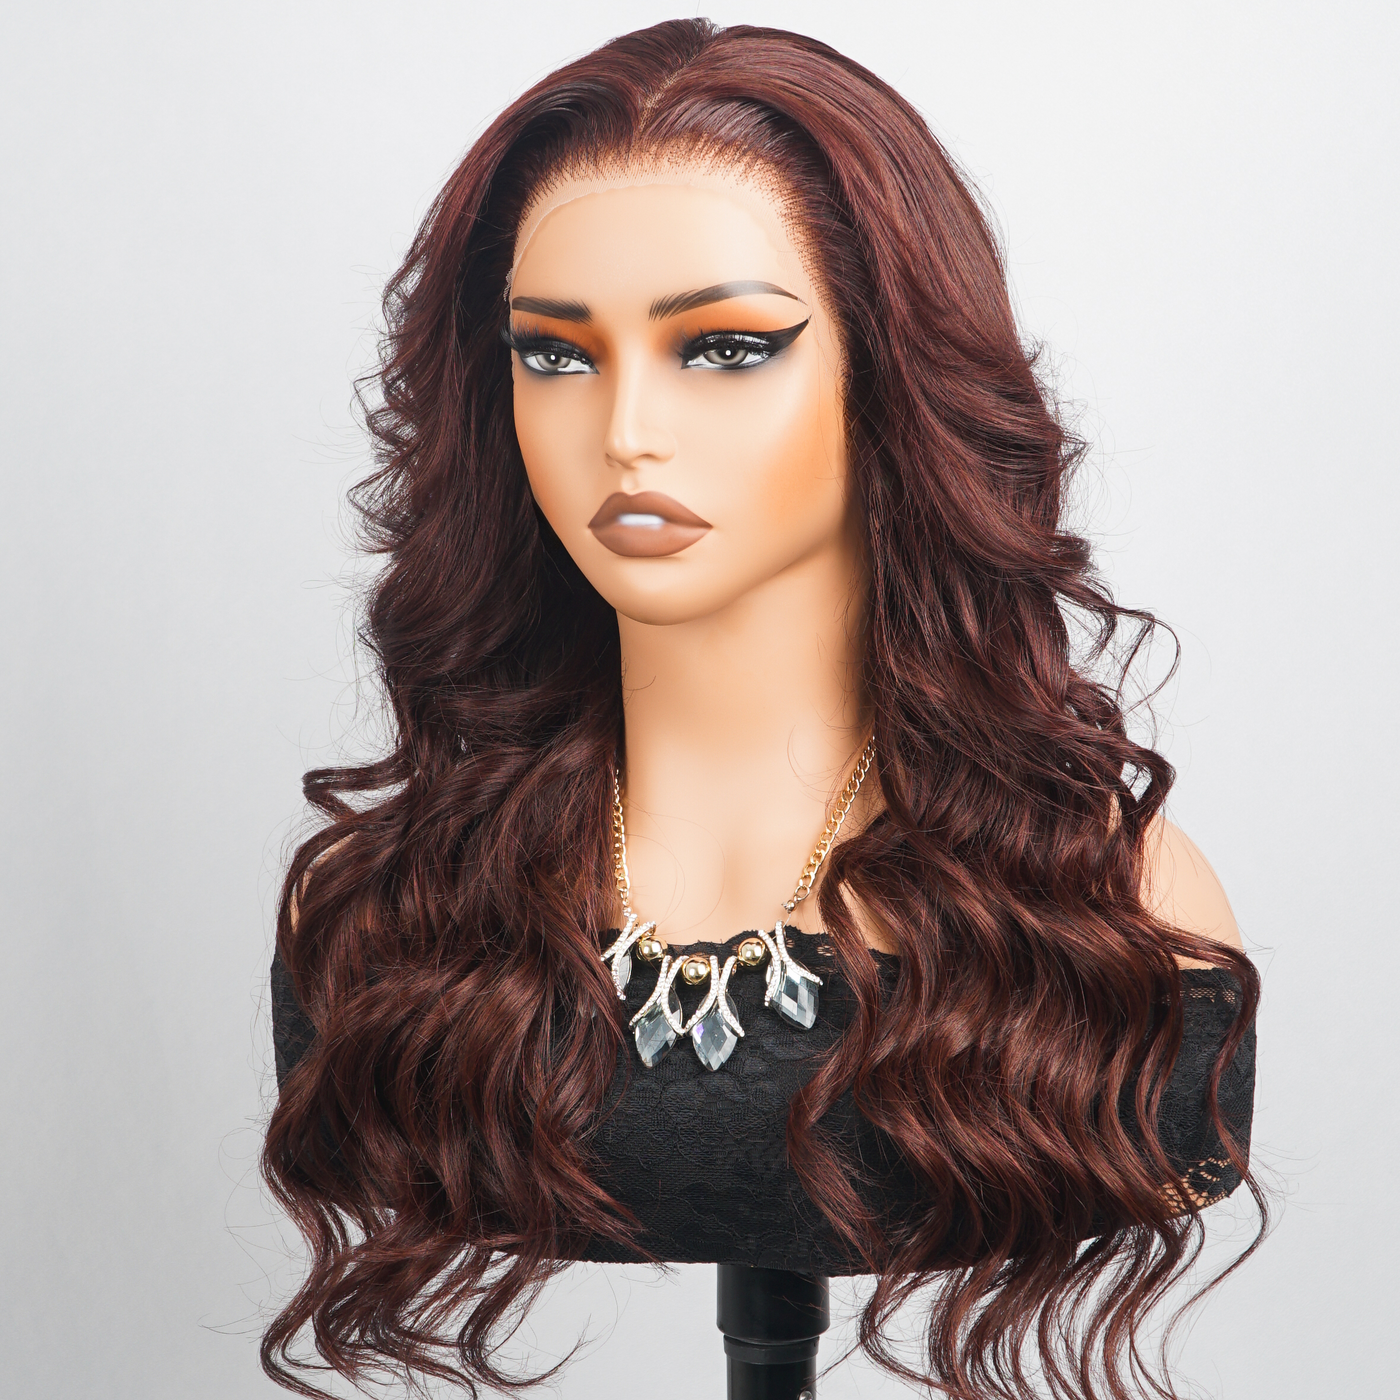 Luxury Designer Series Reddish Brown Loose Wave 13x4 Lace Front Wig 250% Density Human Hair Colored Wig Fashionable Wavy Hairstyle for All Occasions-GEETA HAIR